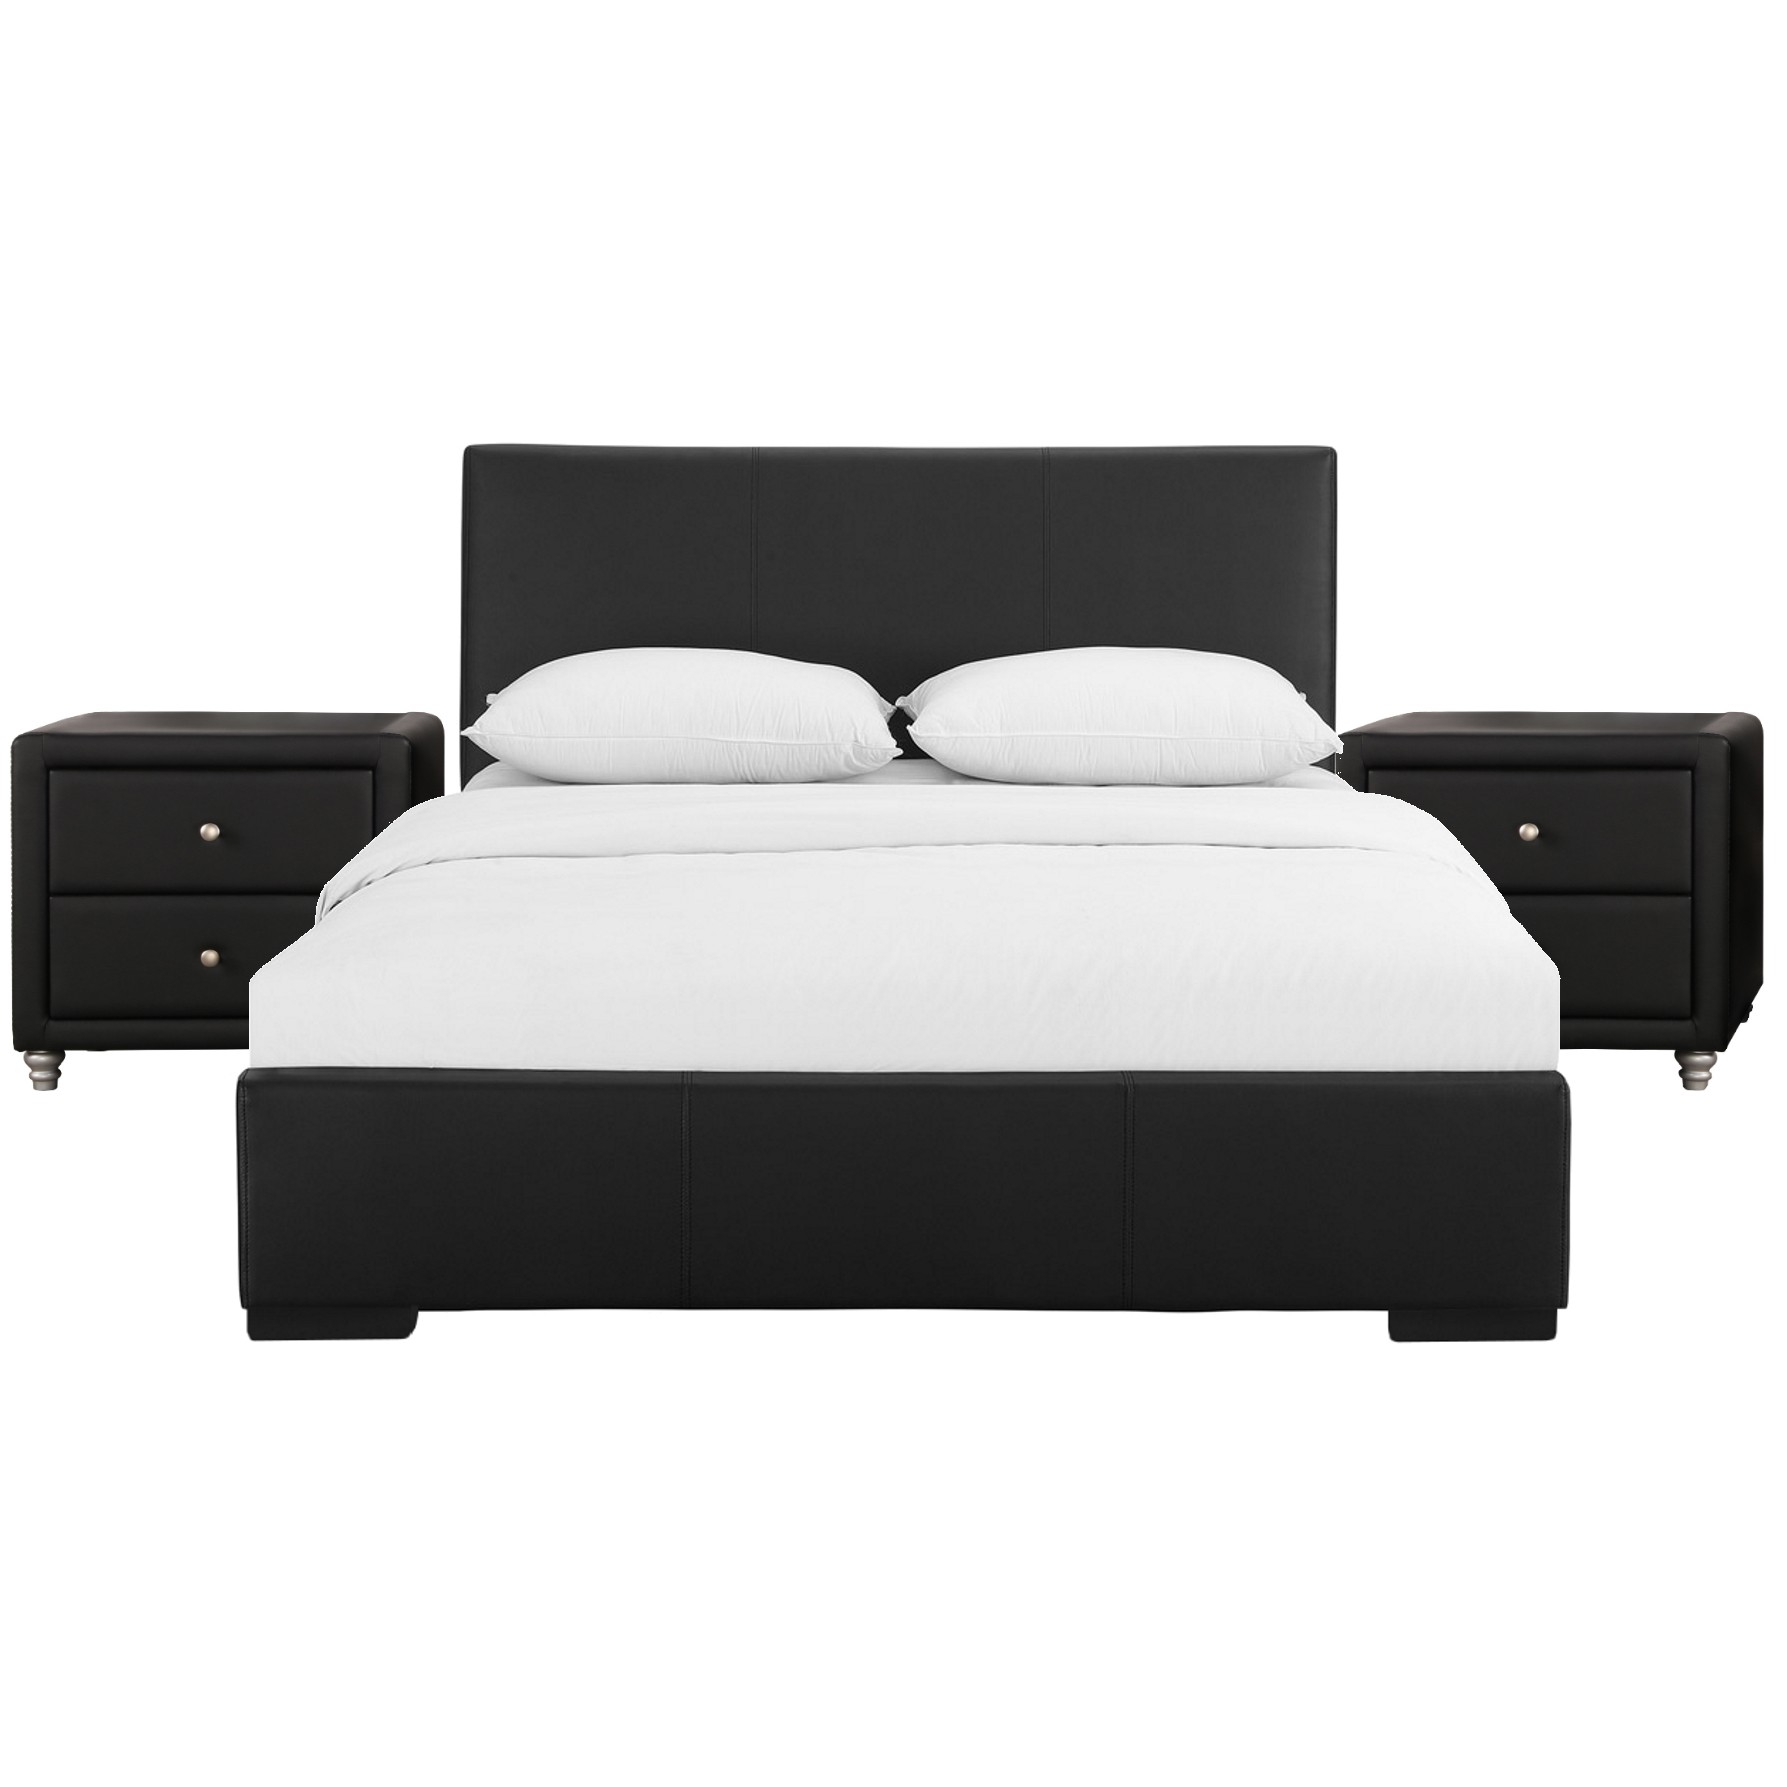 Black Upholstered Platform King Bed with Two Nightstands-397052-1